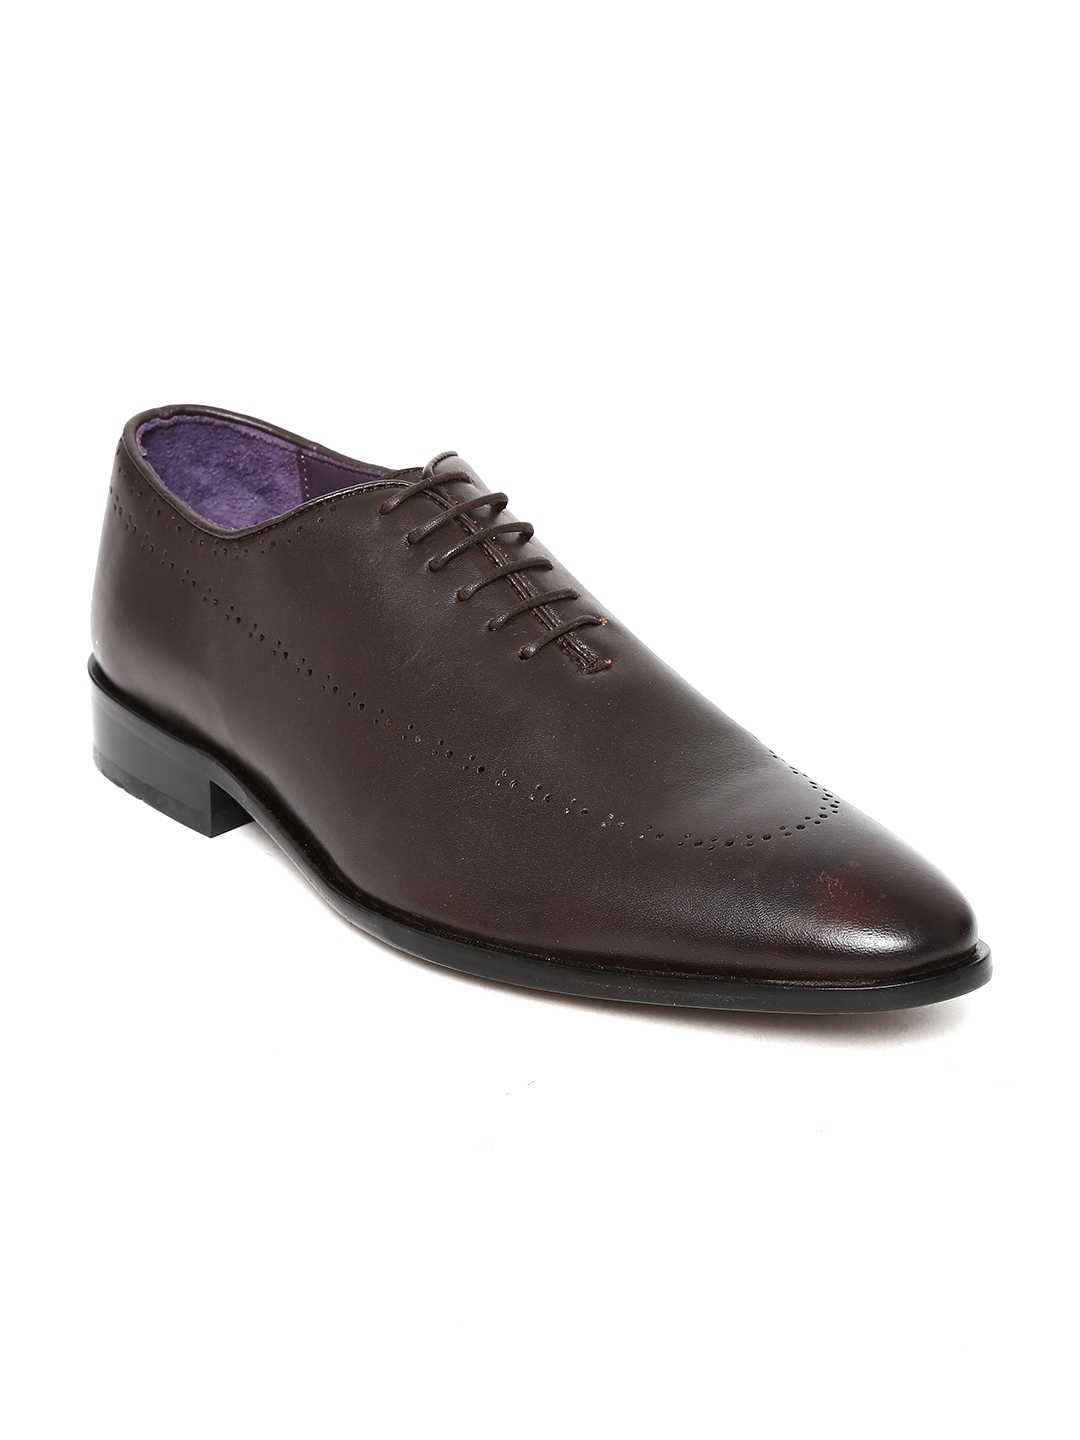 Buy Louis Philippe Men Chocolate Brown Leather Formal Shoes - Formal Shoes for Men 431257 | Myntra